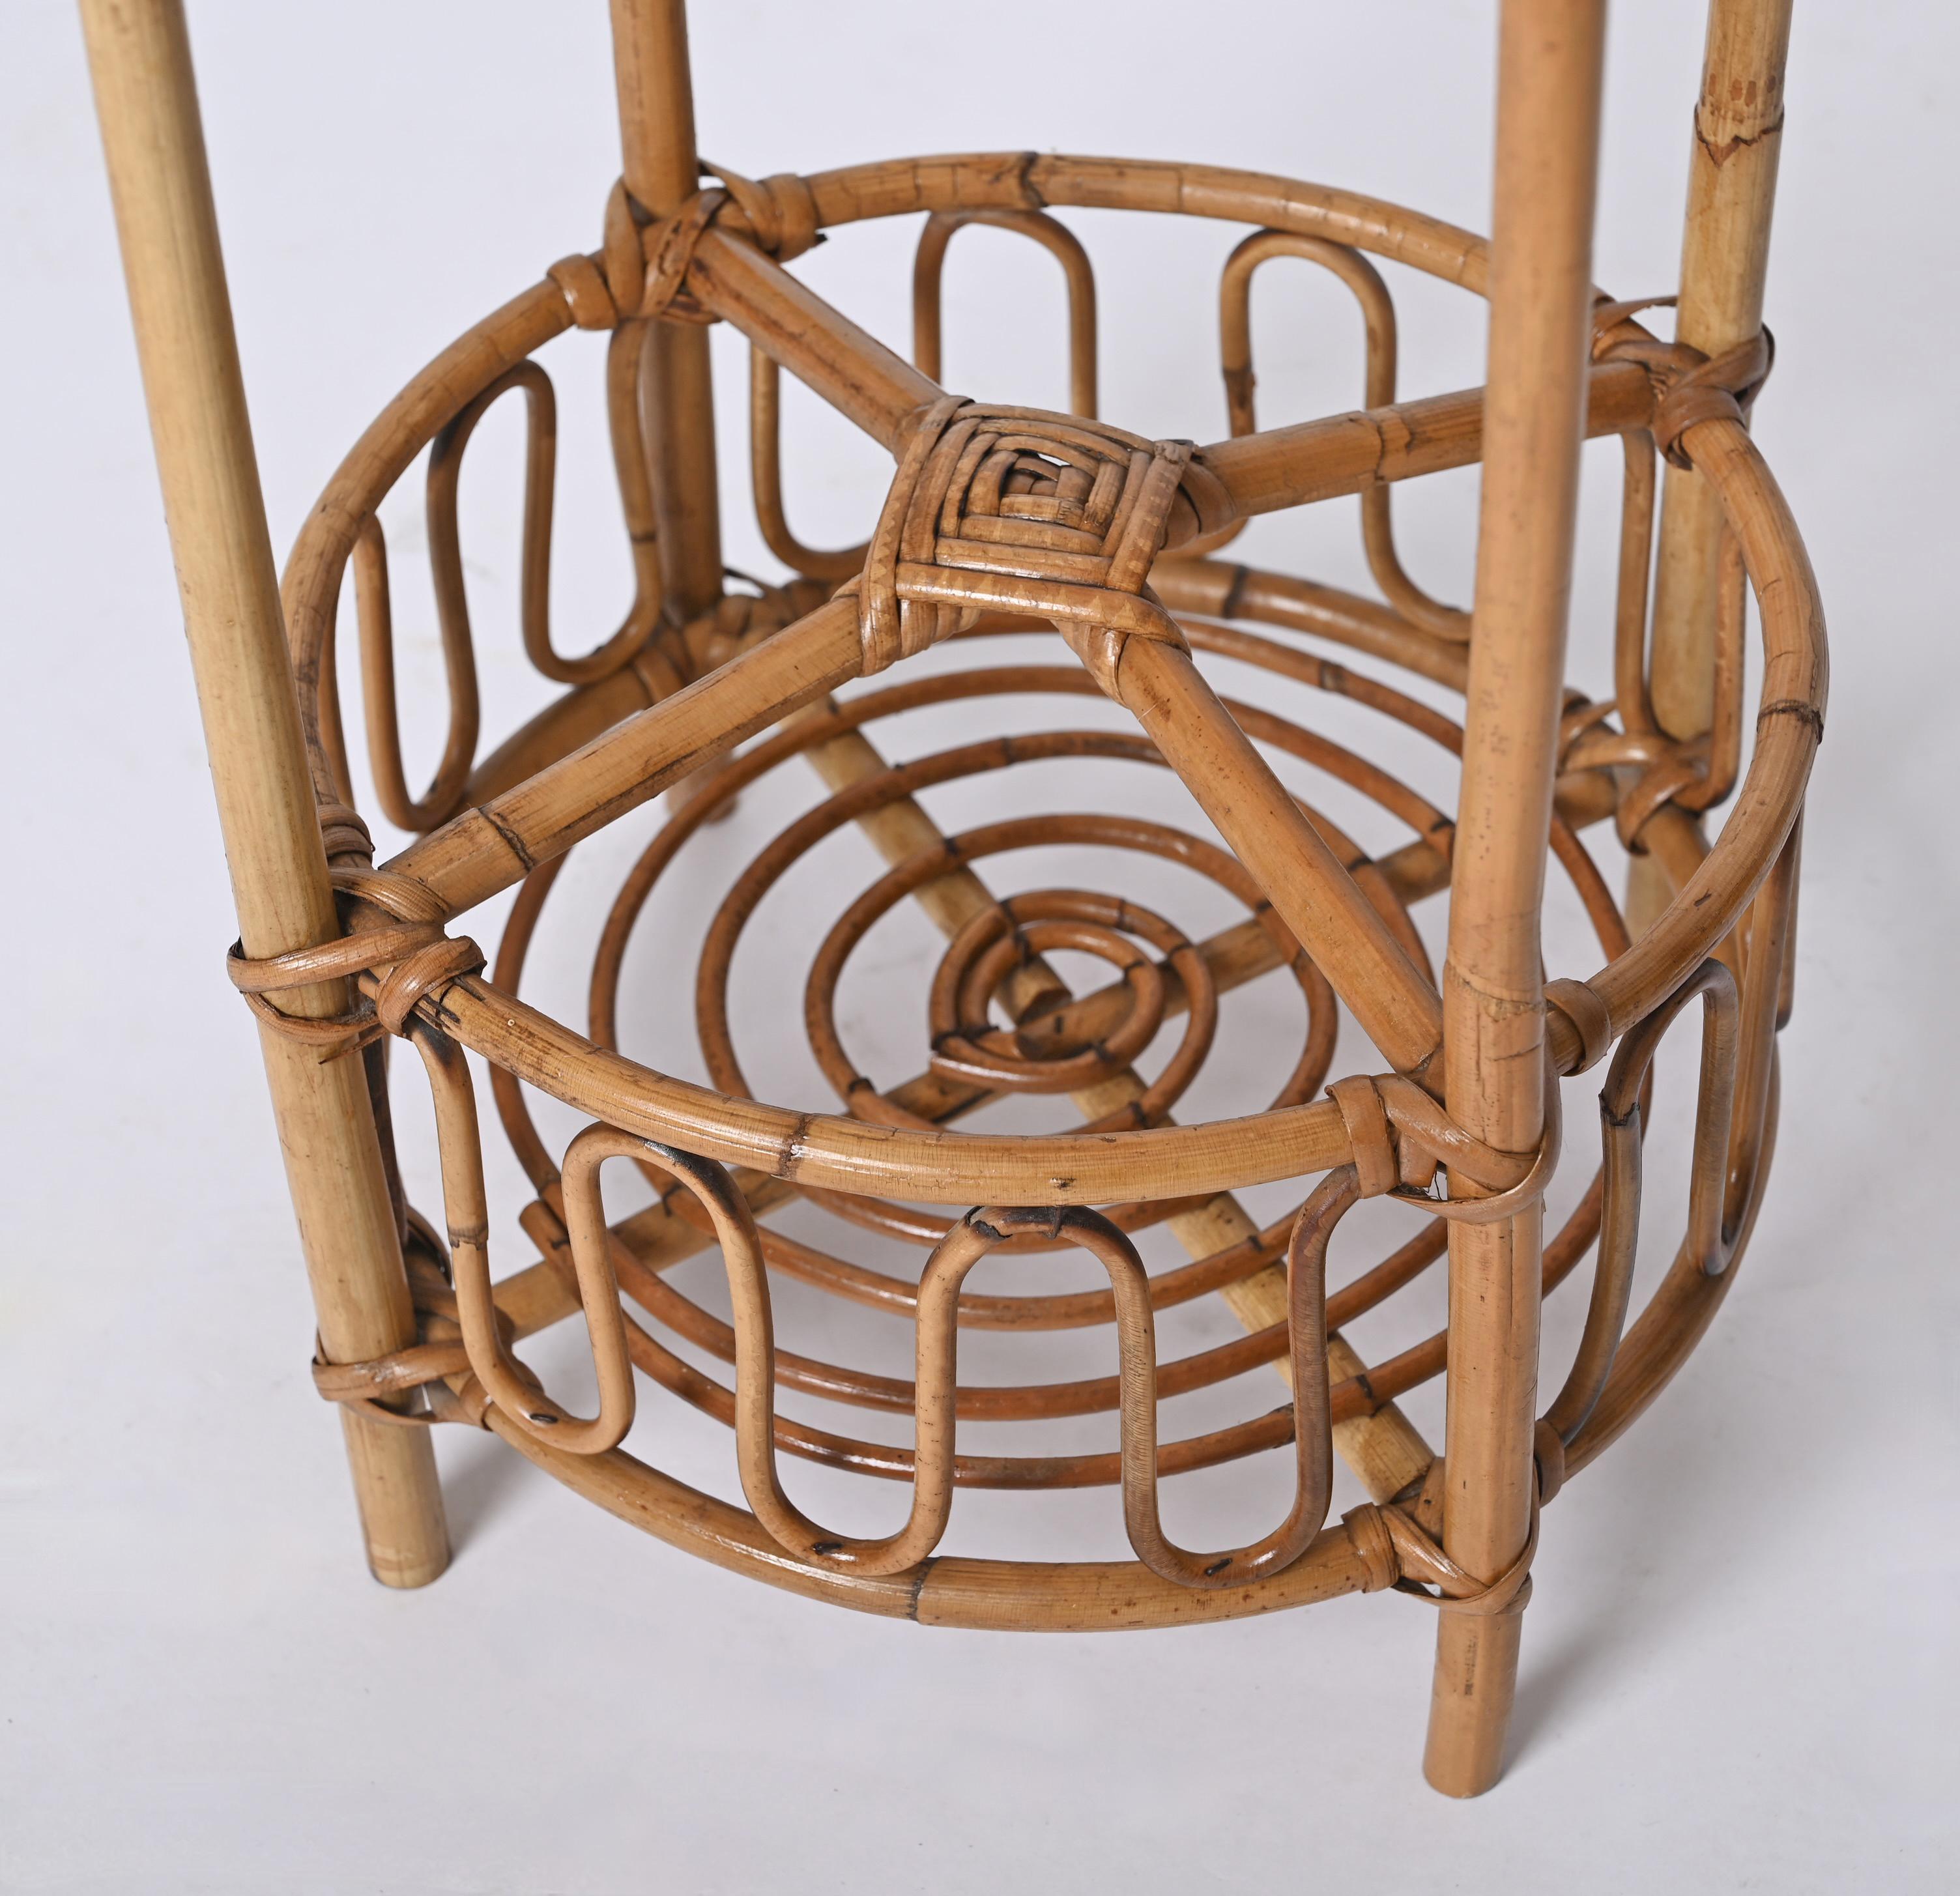 French Riviera Round Service Table with Bamboo and Rattan Bottle Holder, 1960s For Sale 8